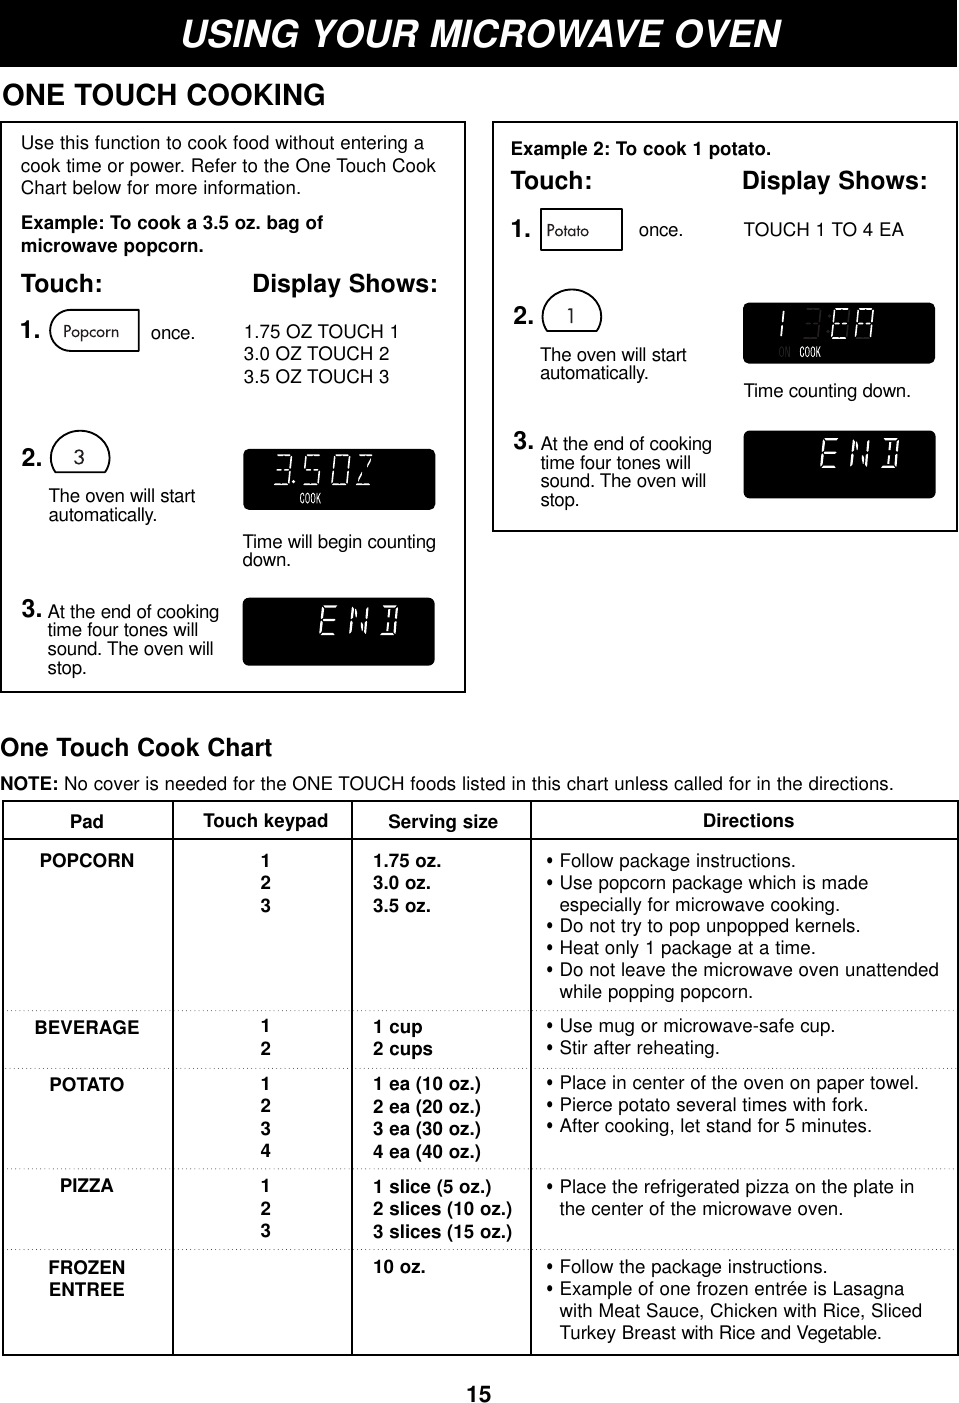 15USING YOUR MICROWAVE OVENOne Touch Cook ChartNOTE: No cover is needed for the ONE TOUCH foods listed in this chart unless called for in the directions.PadPOPCORNBEVERAGEPOTATOPIZZAFROZENENTREETouch keypad12 31 2 1 2 3 4 1 2 3 Serving size1.75 oz.3.0 oz.3.5 oz.1 cup2 cups1 ea (10 oz.)2 ea (20 oz.)3 ea (30 oz.)4 ea (40 oz.)1 slice (5 oz.)2 slices (10 oz.)3 slices (15 oz.)10 oz.Directions•Follow package instructions.•Use popcorn package which is made especially for microwave cooking.•Do not try to pop unpopped kernels.•Heat only 1 package at a time.•Do not leave the microwave oven unattendedwhile popping popcorn.•Use mug or microwave-safe cup.•Stir after reheating.•Place in center of the oven on paper towel.•Pierce potato several times with fork.•After cooking, let stand for 5 minutes.•Place the refrigerated pizza on the plate in the center of the microwave oven.•Follow the package instructions.•Example of one frozen entrée is Lasagna with Meat Sauce, Chicken with Rice, SlicedTurkey Breast with Rice and Vegetable.Use this function to cook food without entering acook time or power. Refer to the One Touch CookChart below for more information.Example: To cook a 3.5 oz. bag of microwave popcorn.Touch: Display Shows:ONE TOUCH COOKING1.2.3.Time will begin countingdown.At the end of cooking time four tones willsound. The oven willstop.Example 2: To cook 1 potato.Touch: Display Shows:1.2.3.Time counting down.The oven will startautomatically.At the end of cooking time four tones willsound. The oven willstop.once.once.1.75 OZ TOUCH 13.0 OZ TOUCH 23.5 OZ TOUCH 3TOUCH 1 TO 4 EAThe oven will startautomatically.